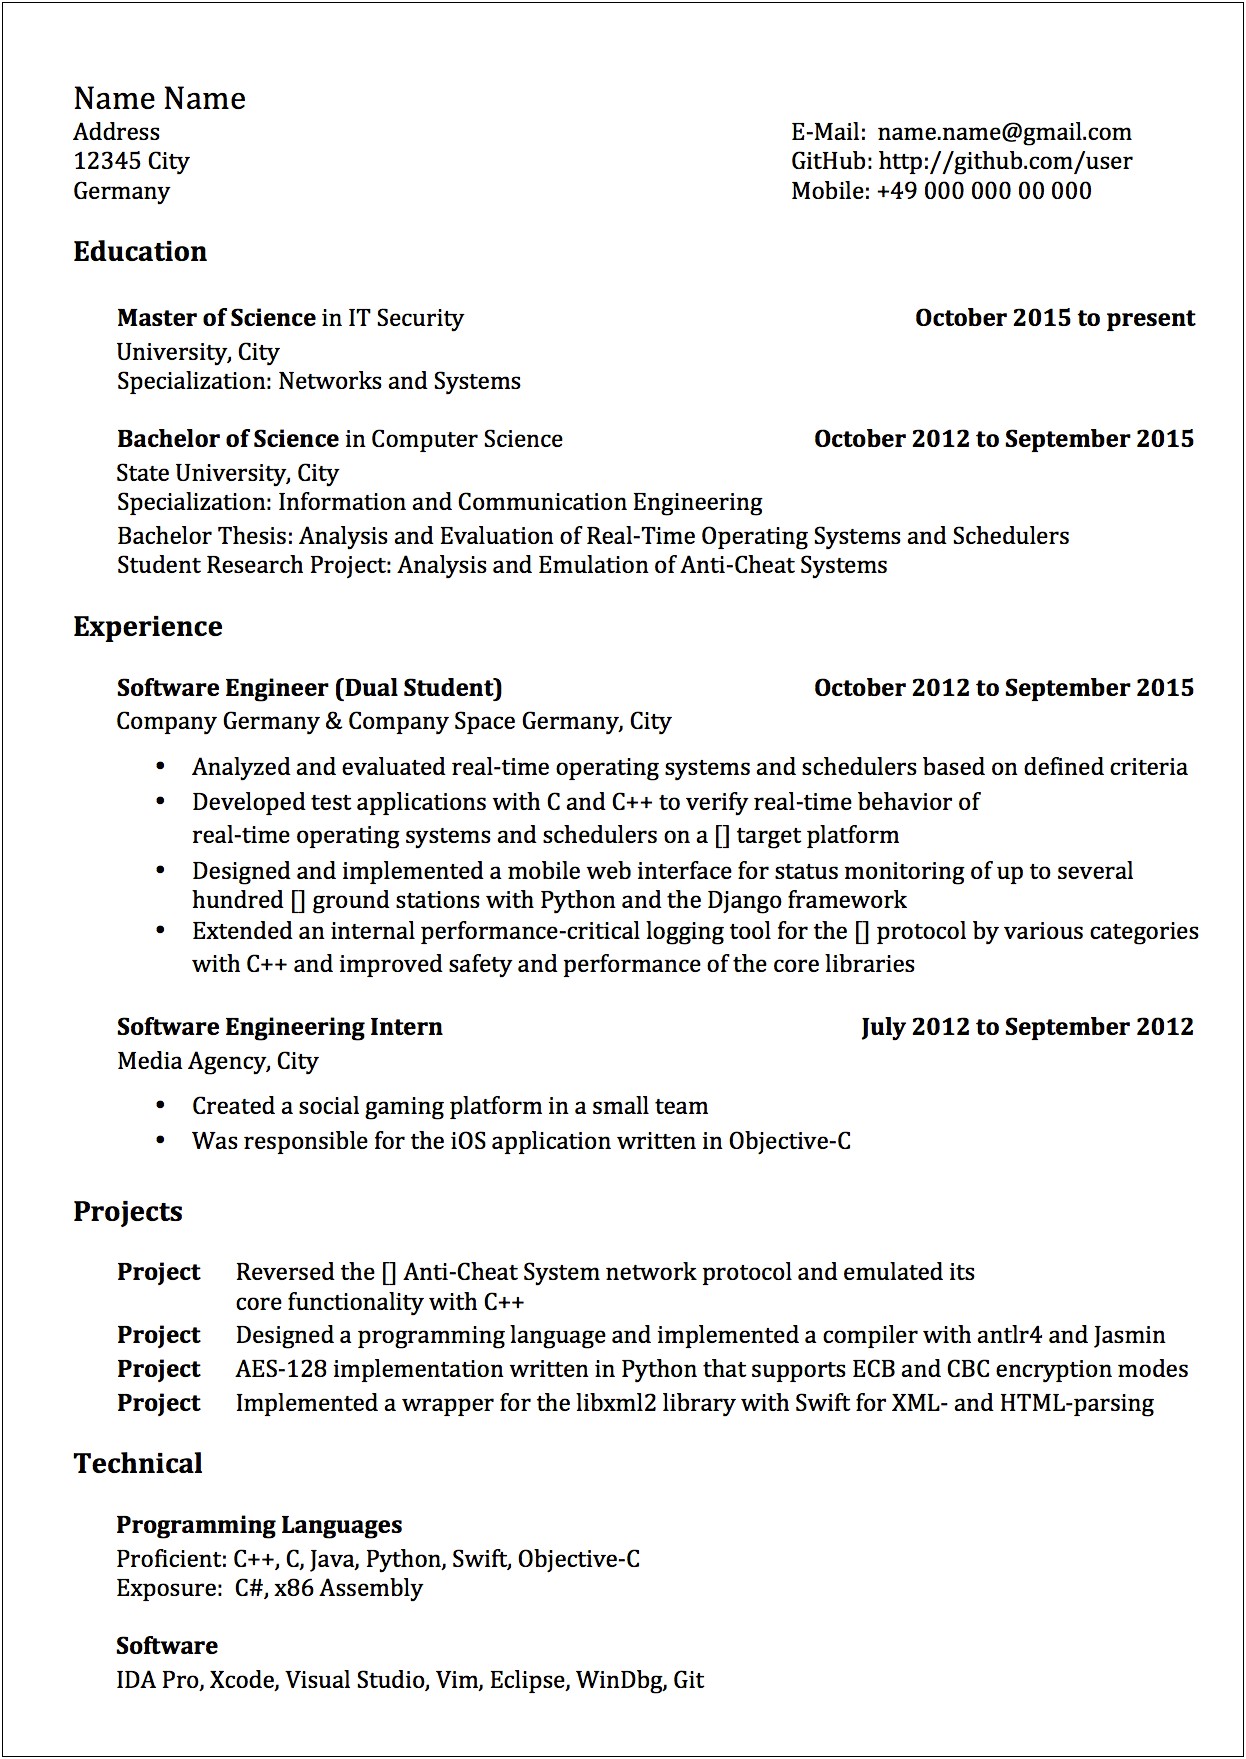 Product Manager Resume Template Reddit Cscareerquestions